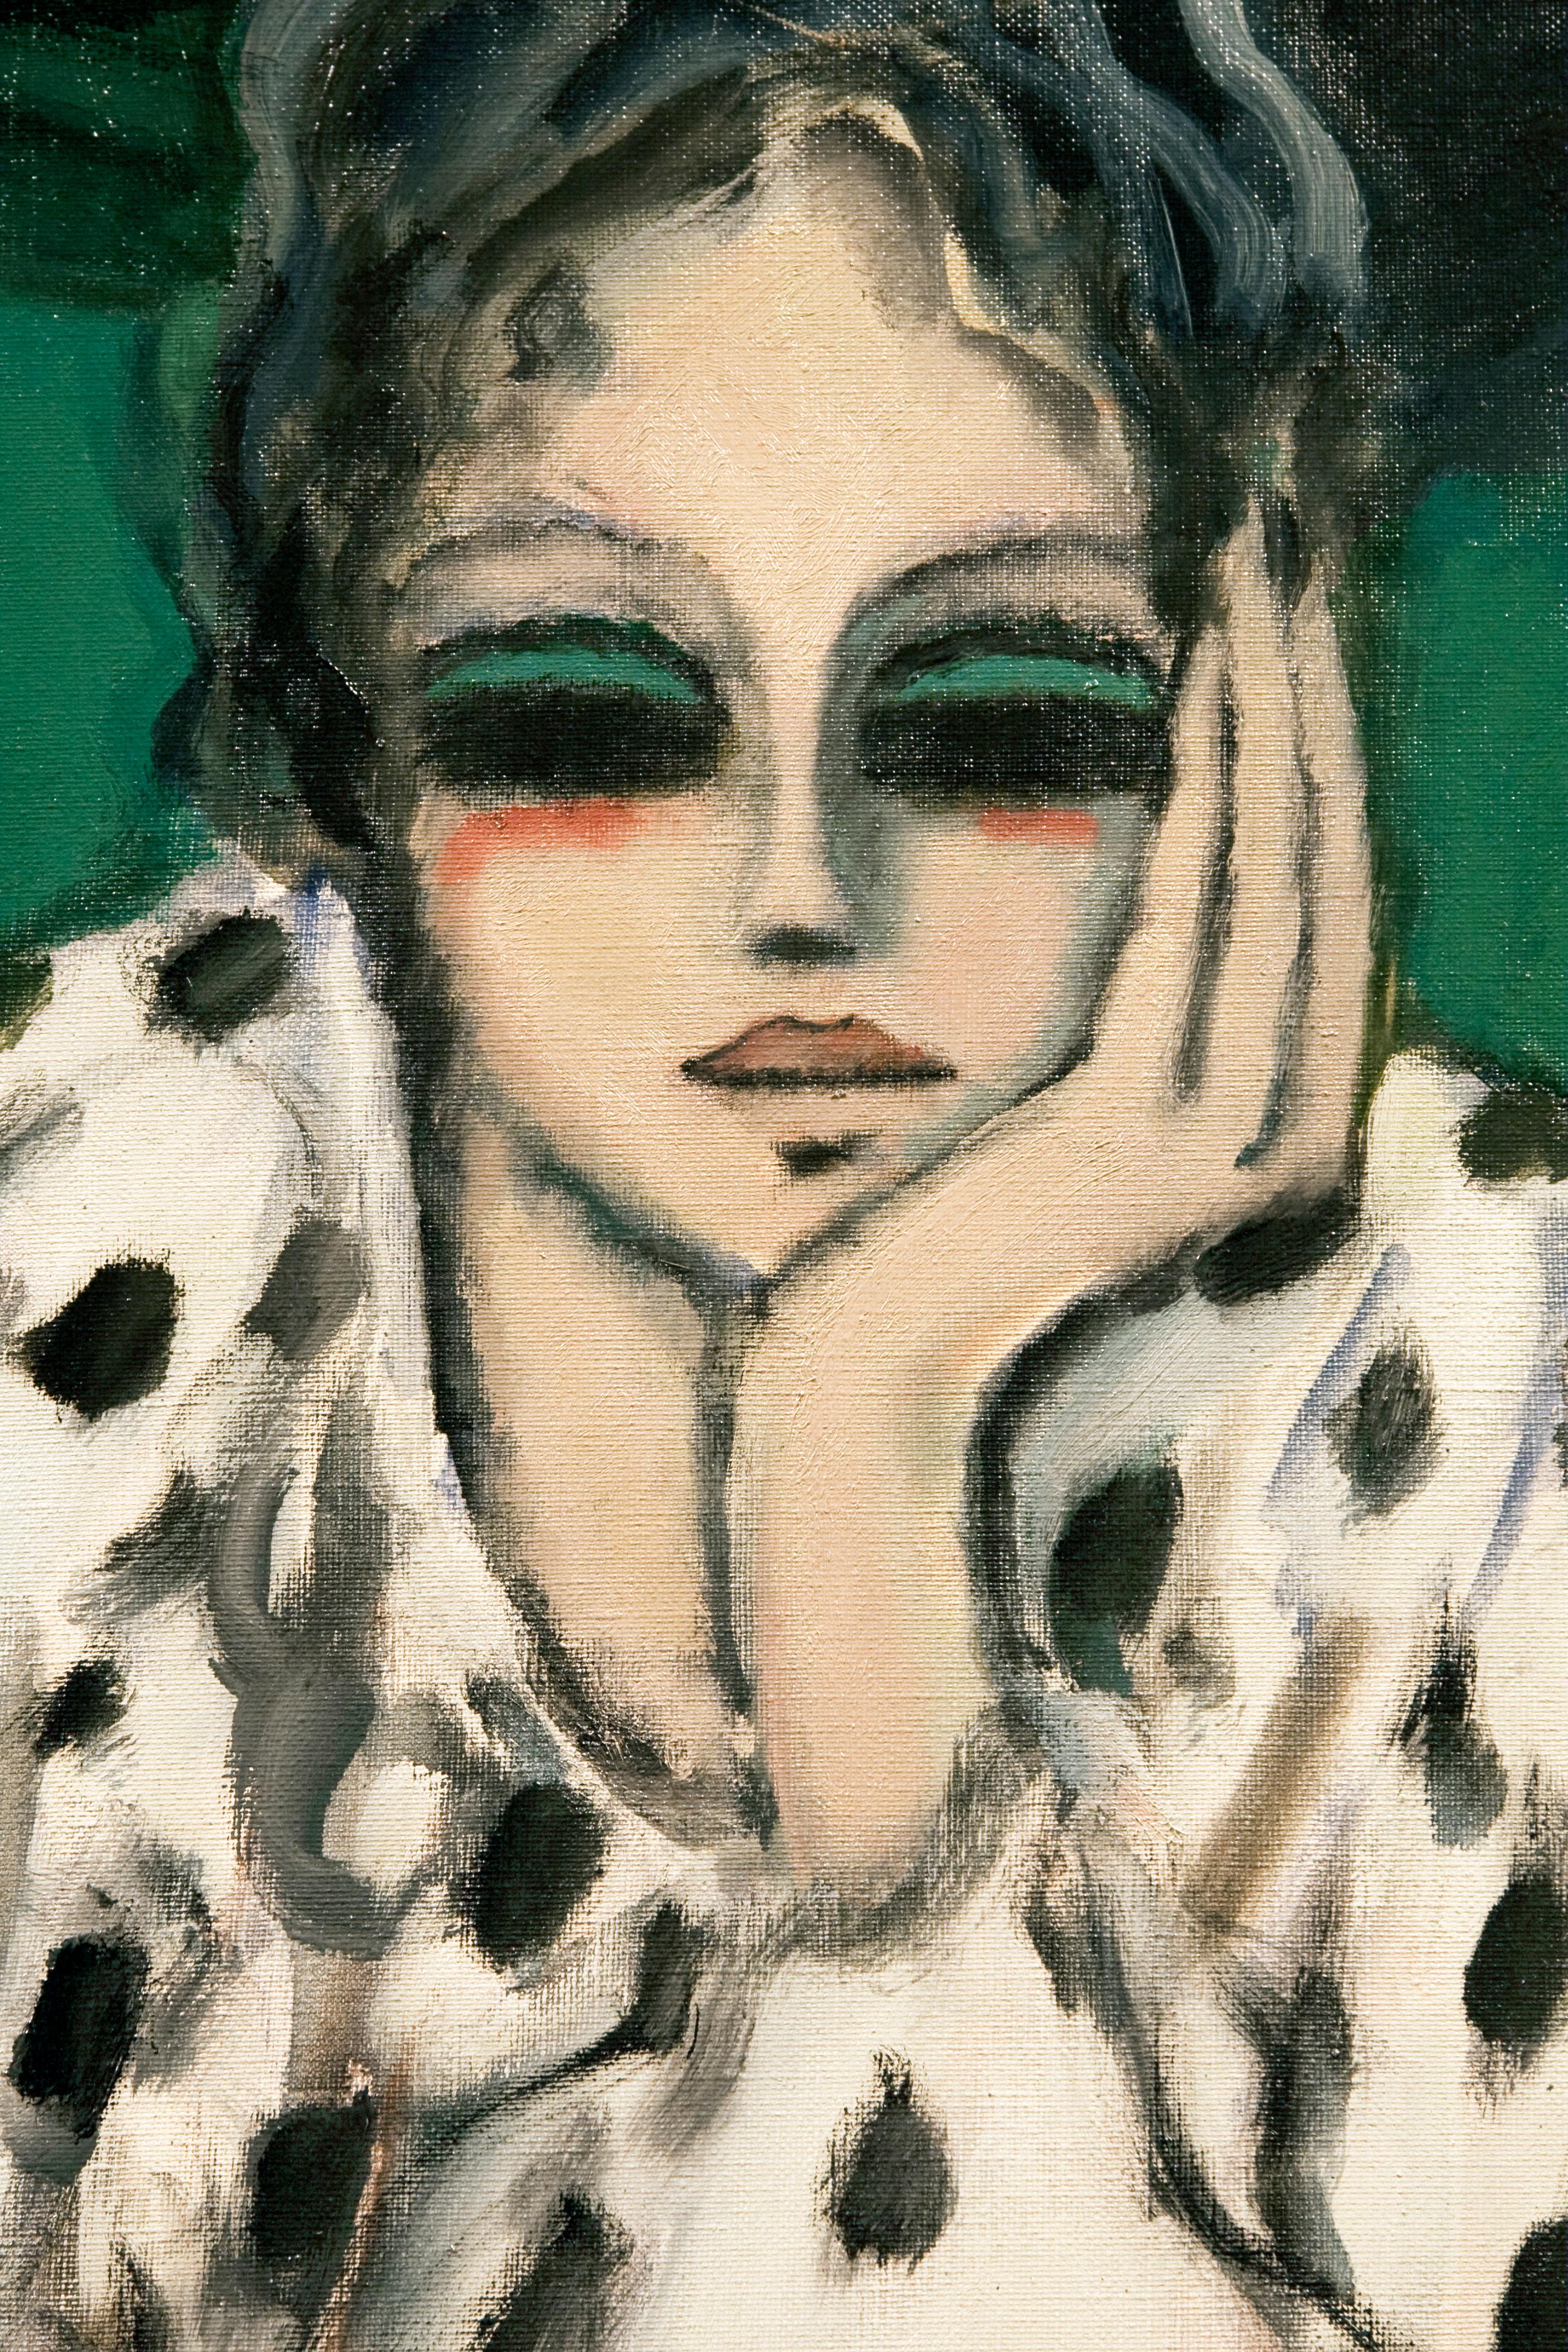 Modern Fauvist Portrait of a Woman by Cassigneul, 